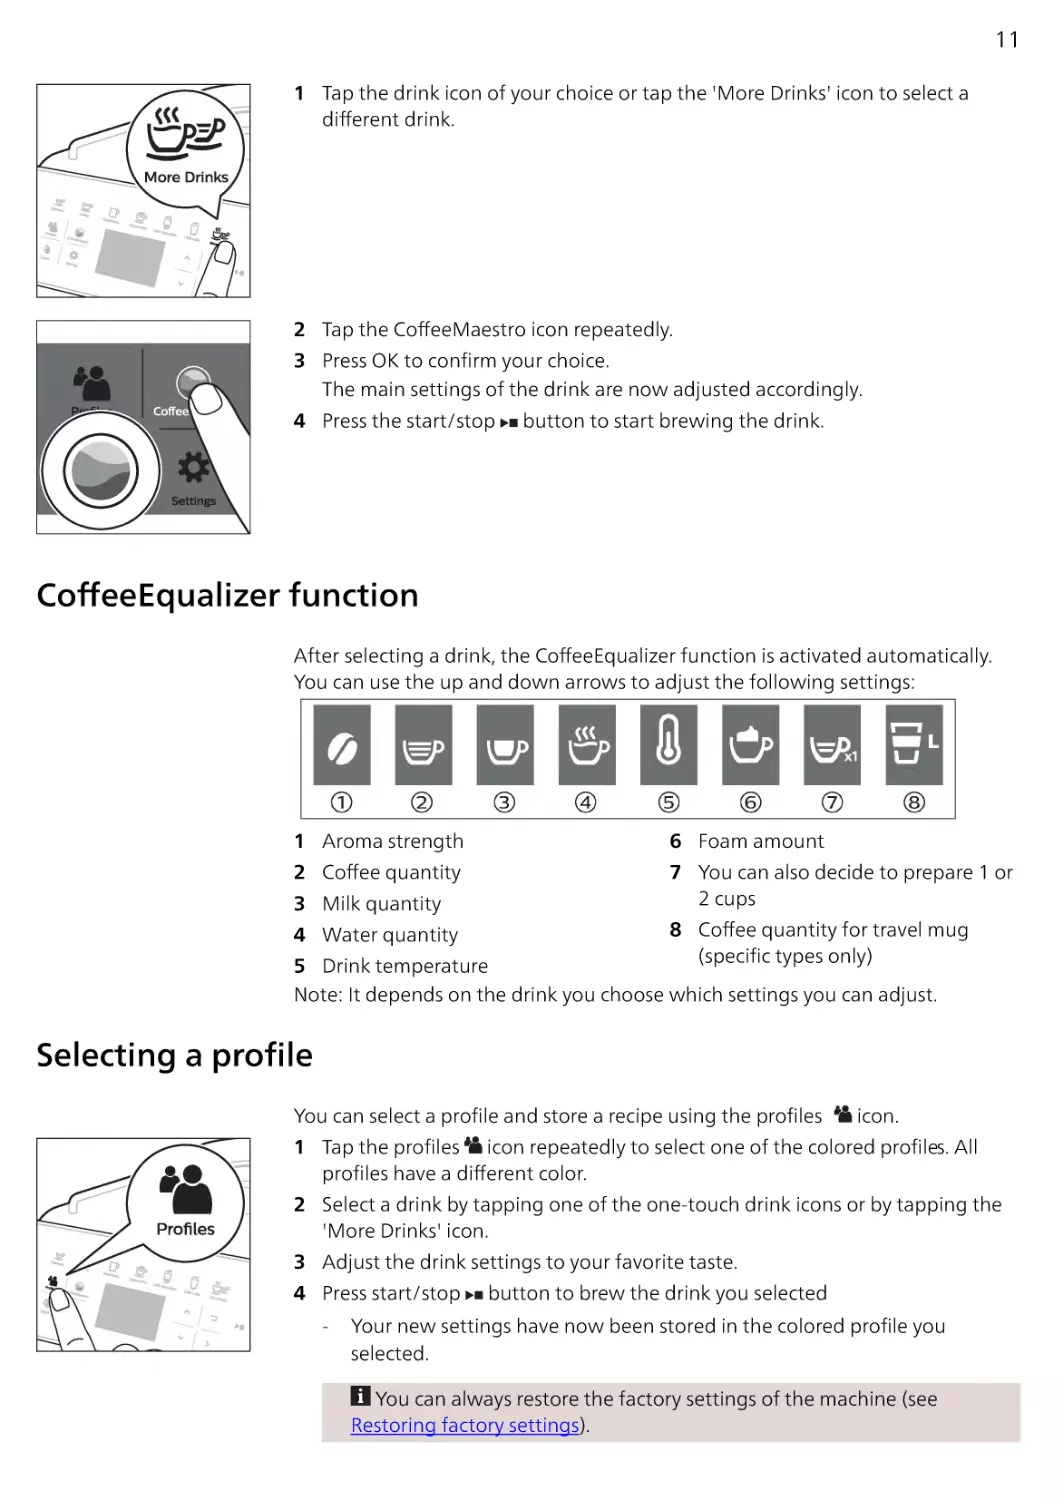 CoffeeEqualizer function
Selecting a profile